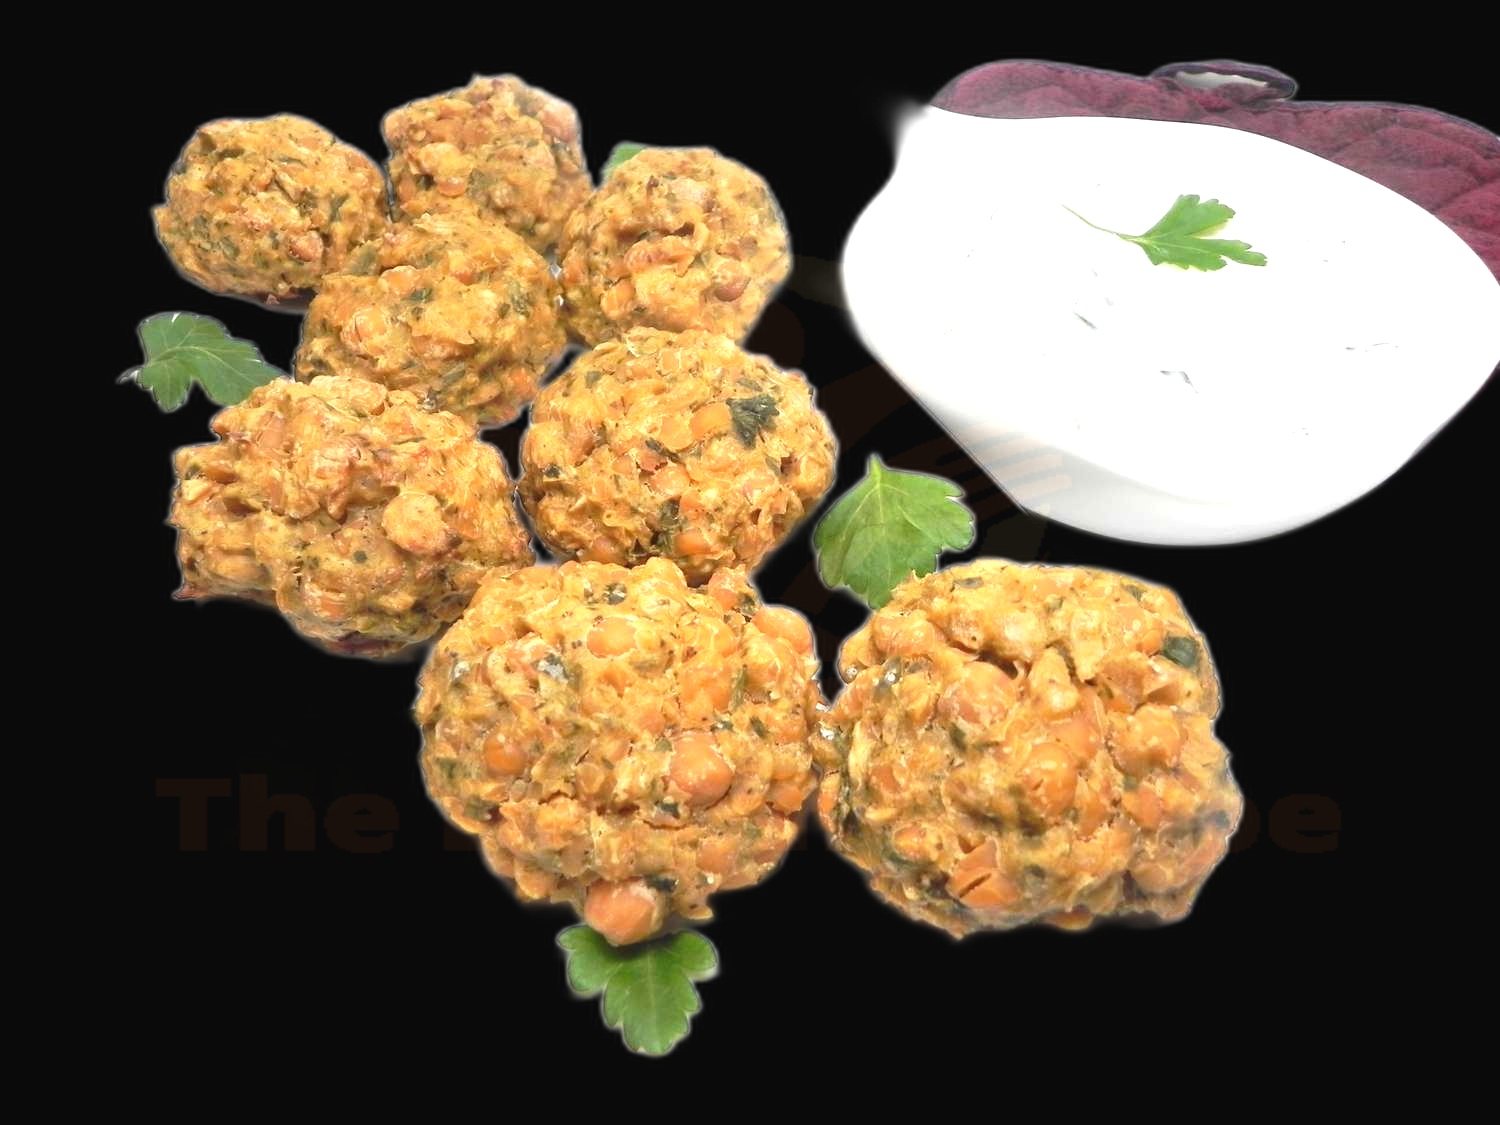 Spicy Baked Falafel with Tzatziki